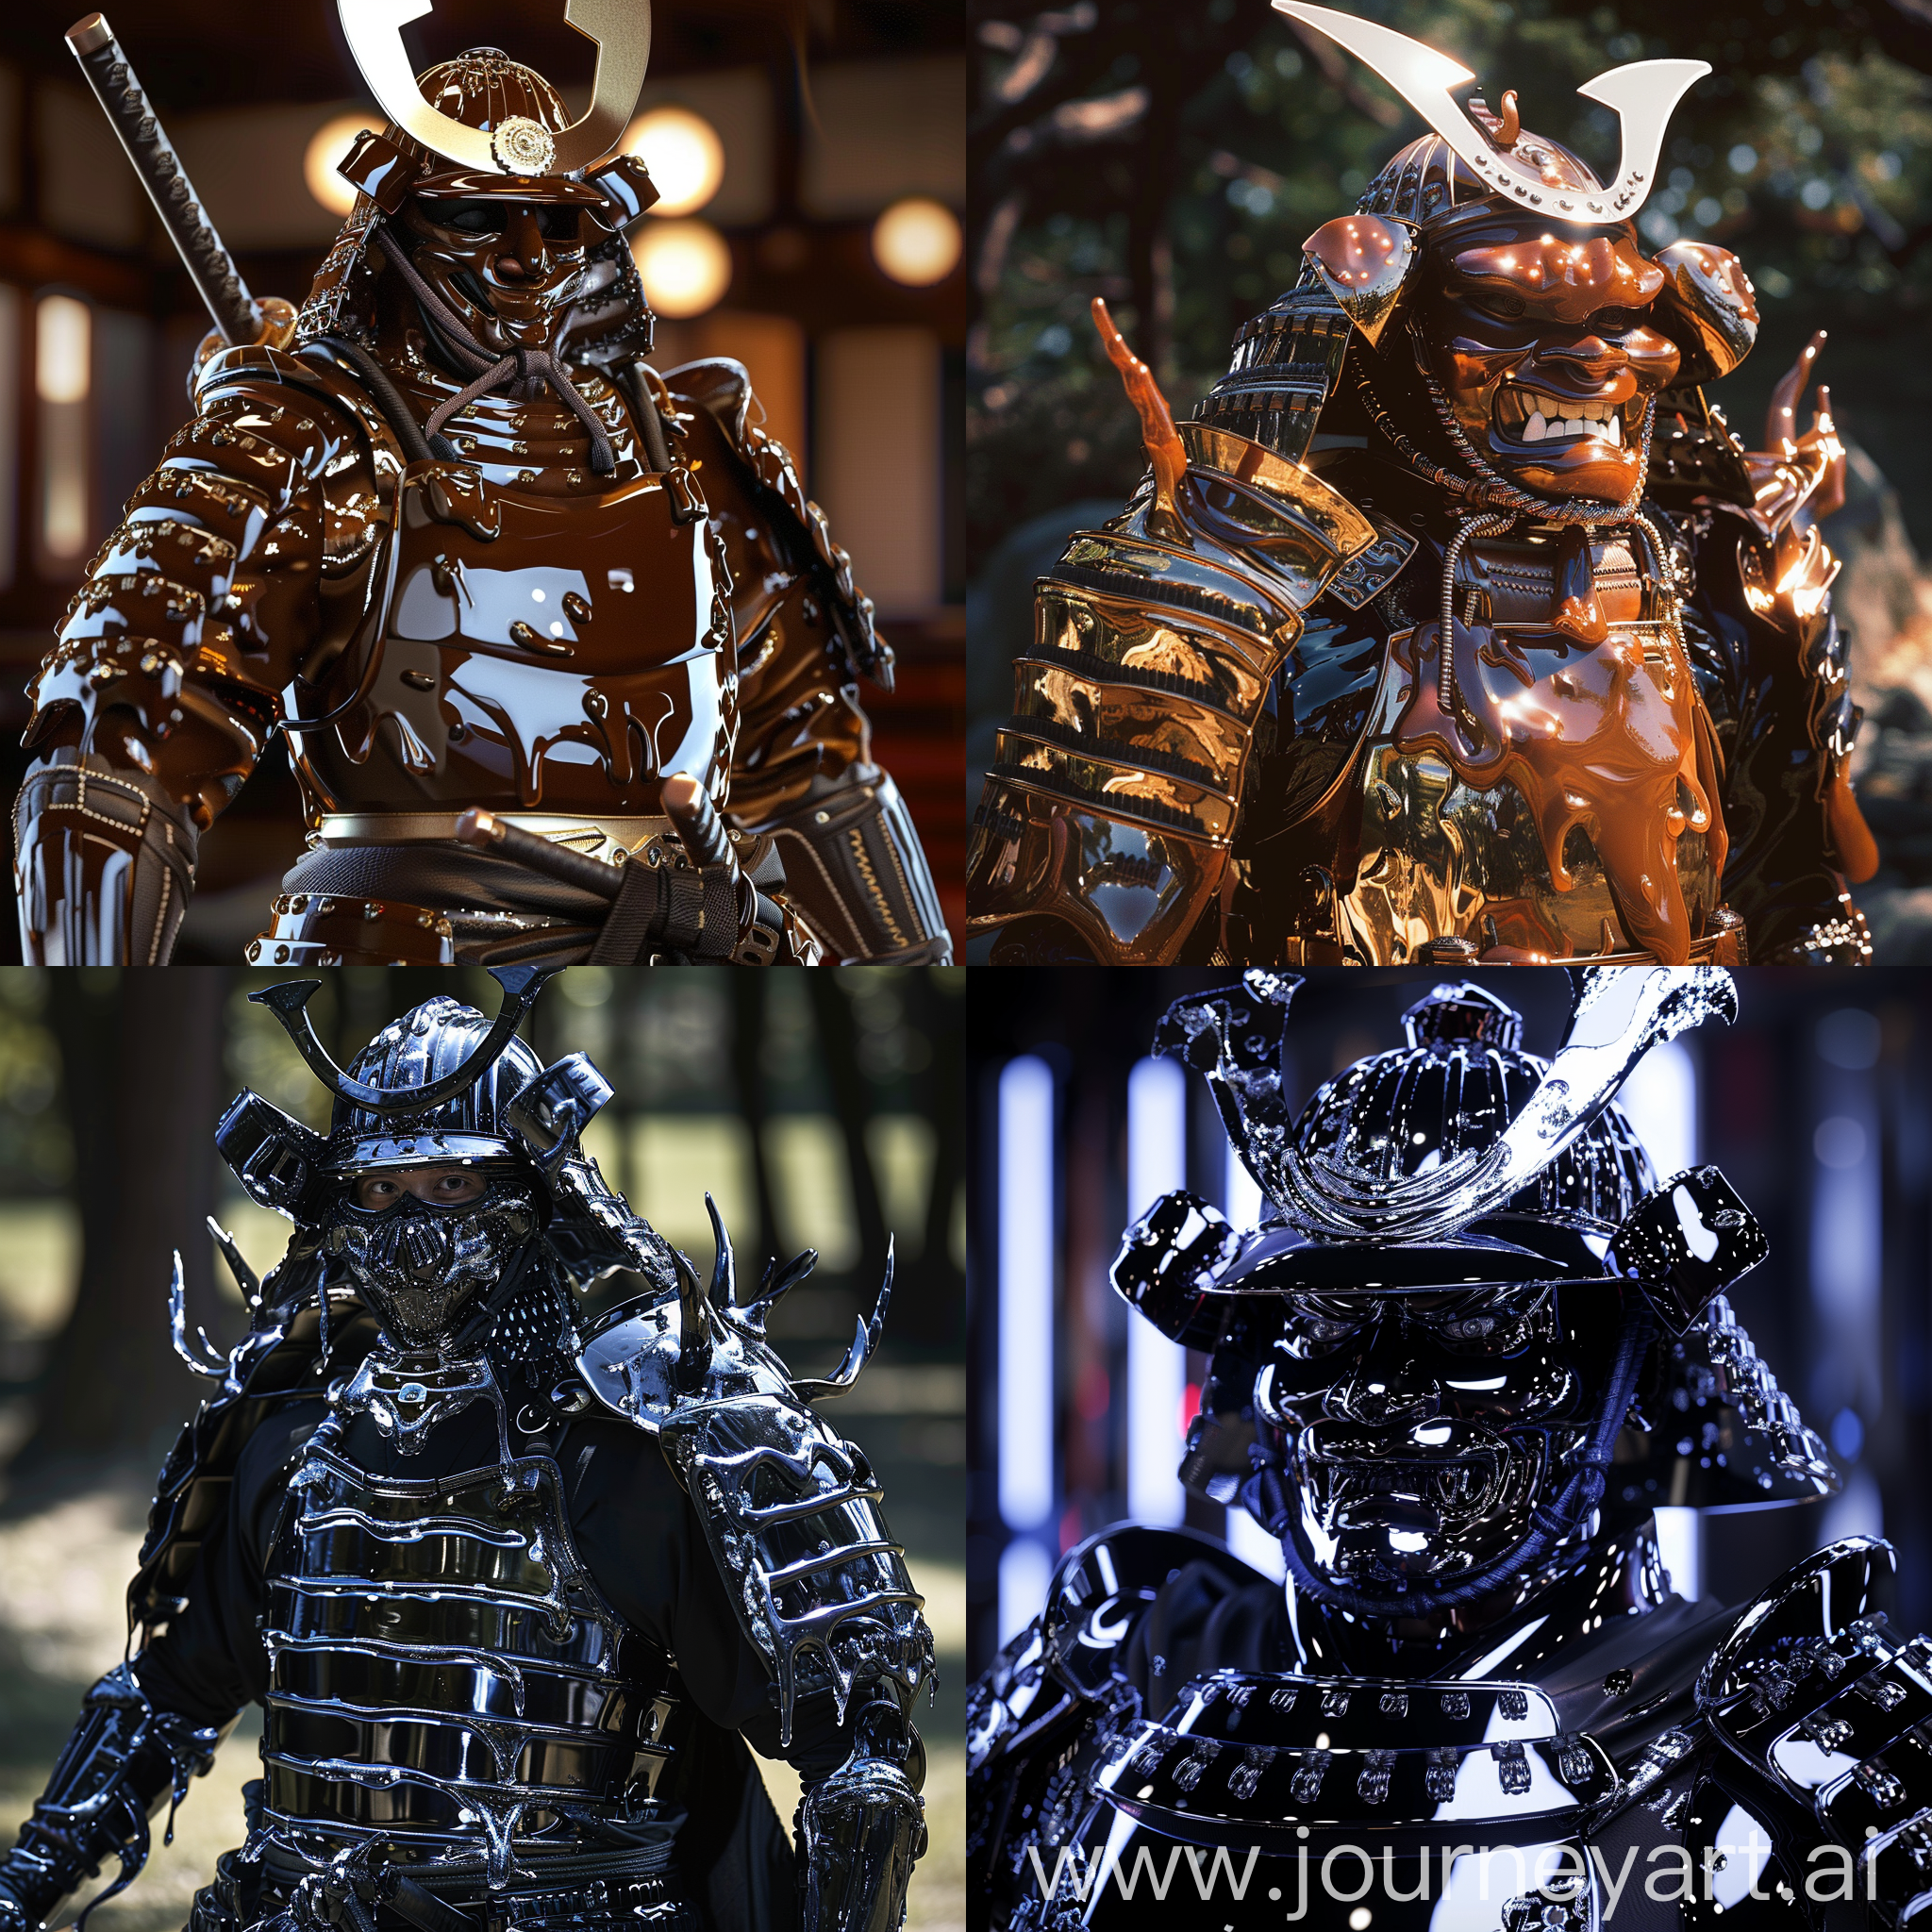 a cool samurai with niclodean slime glazed over his armor, looking shiny and fierce